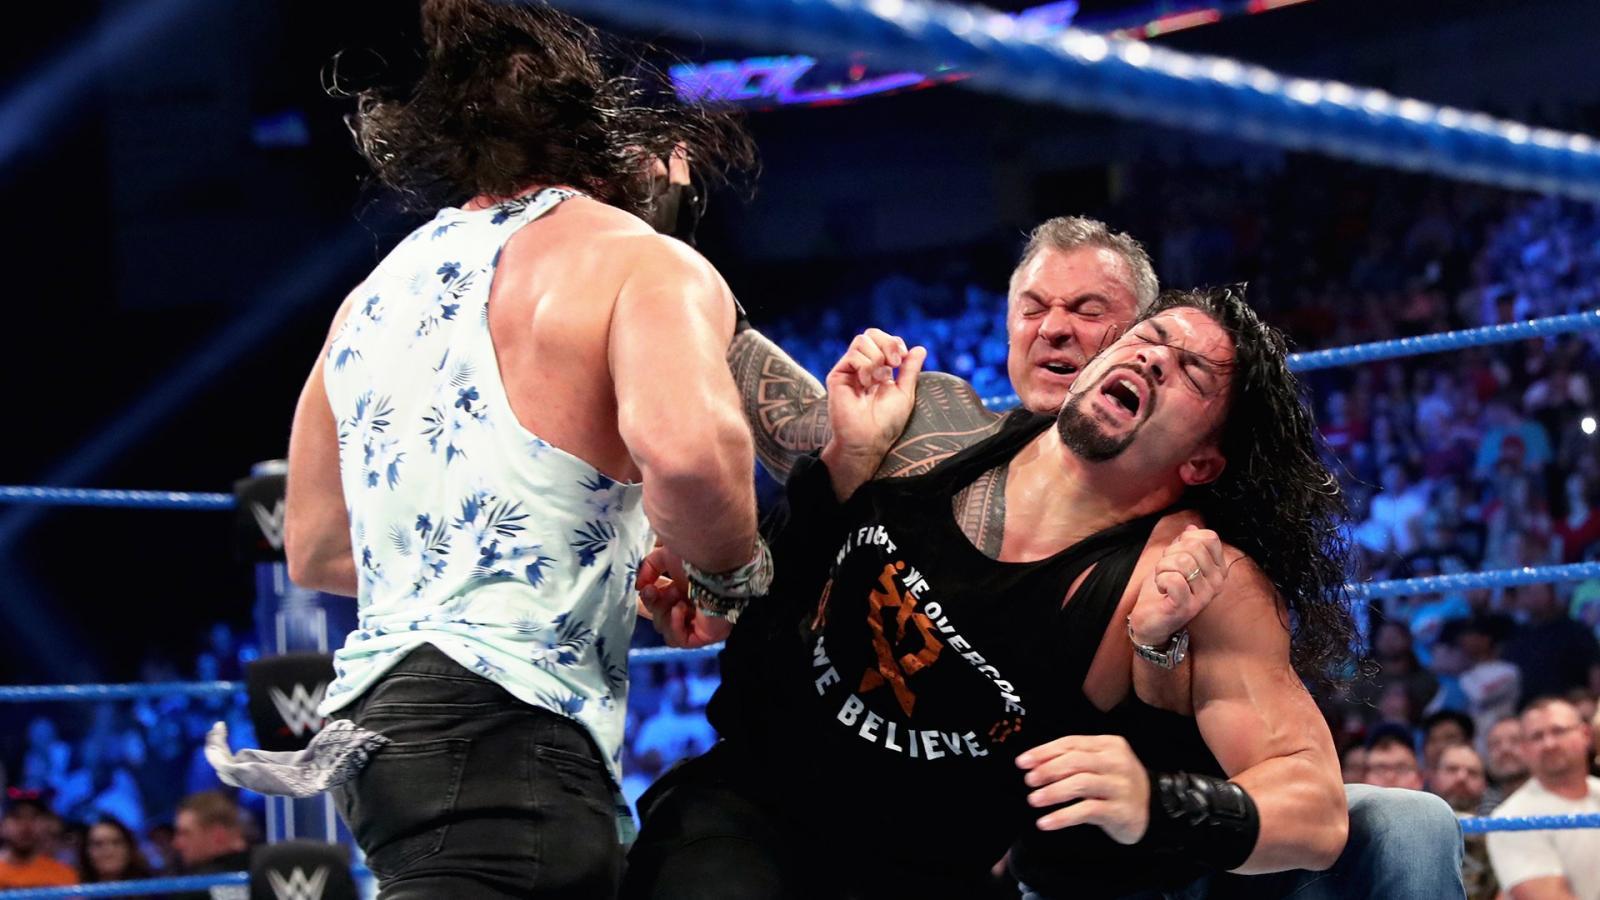 Roman Reigns Vs. Elias Confirmed For Money In The Bank 2019